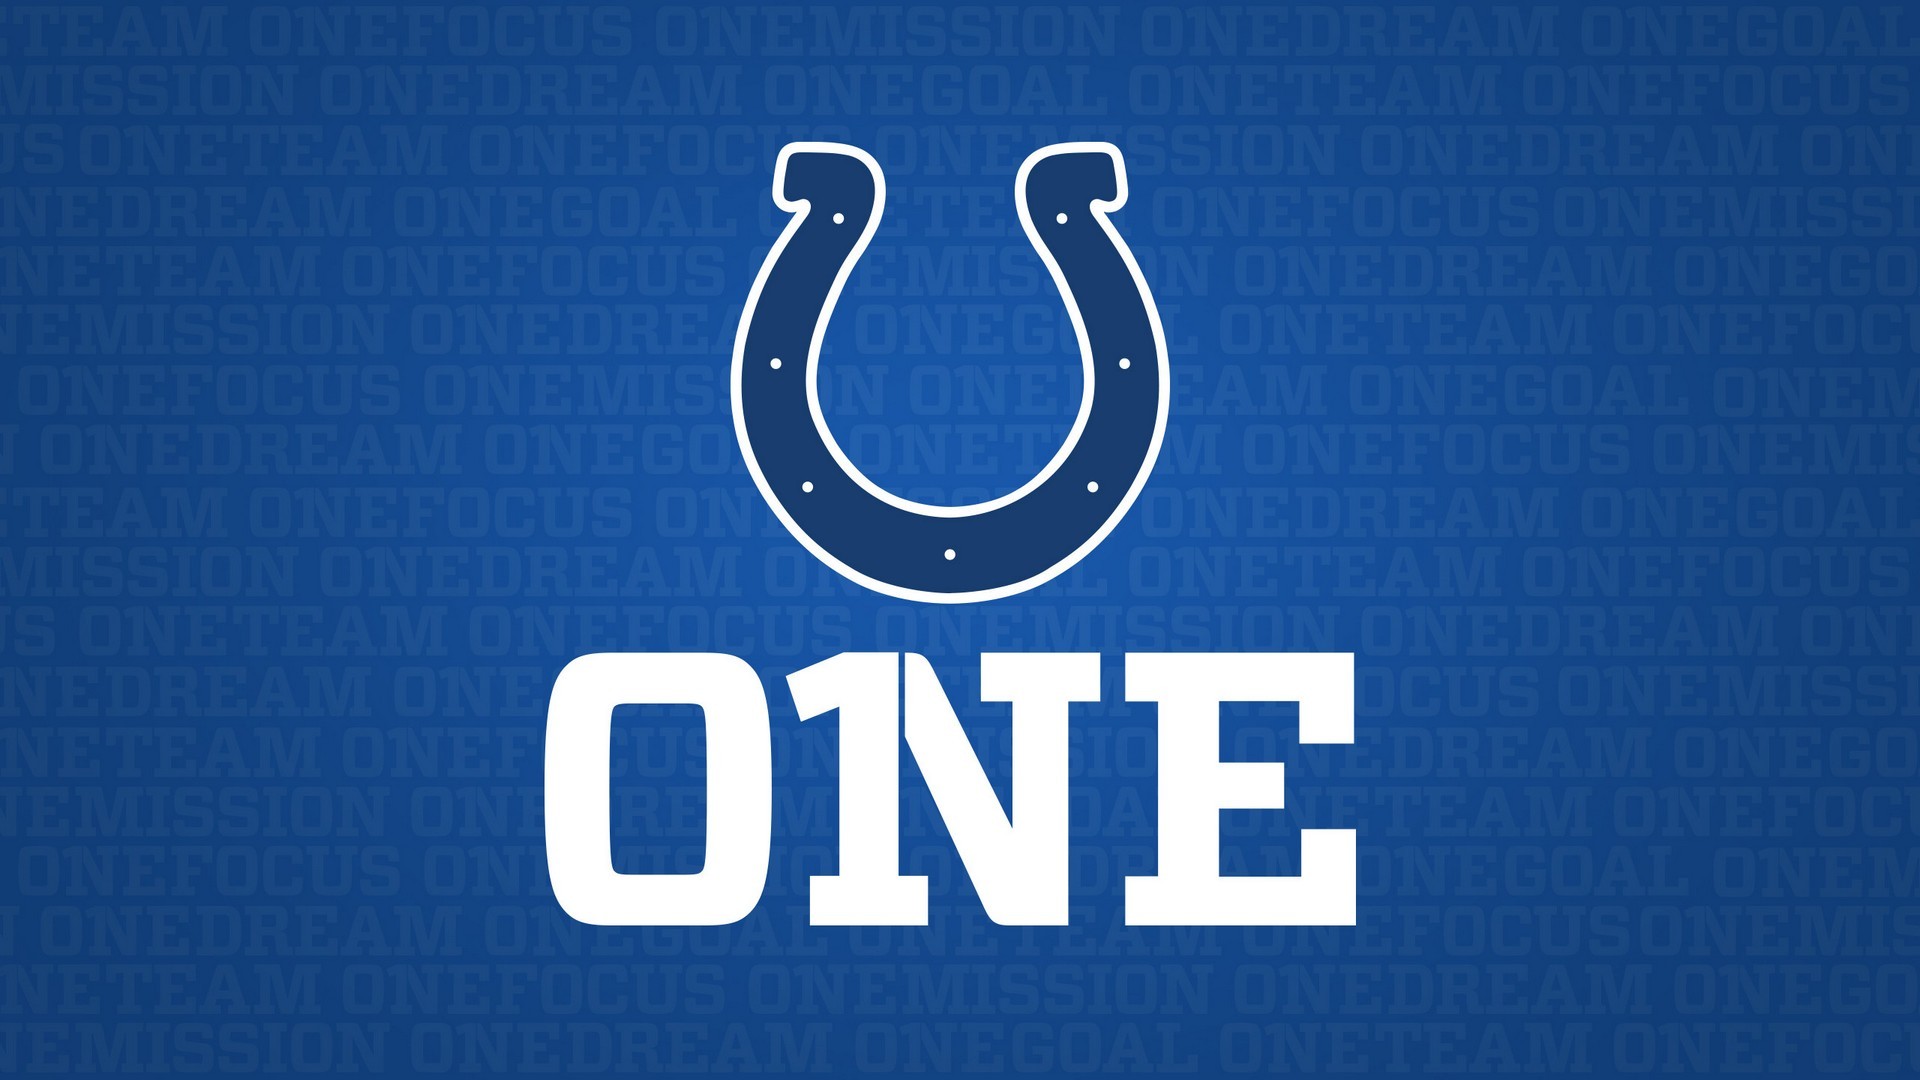 1920x1080 Indianapolis Colts Desktop Wallpapers 